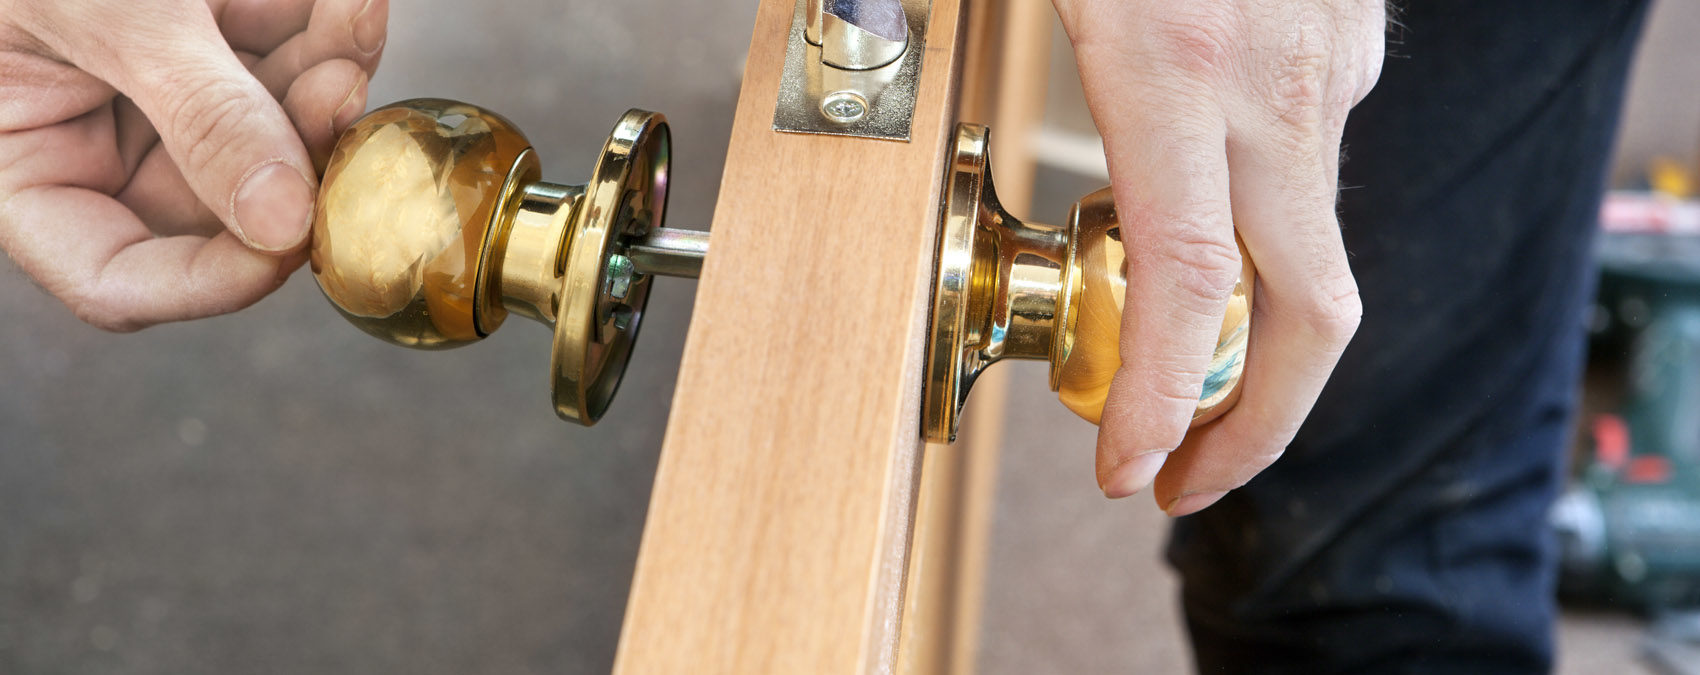 9 Ways to Fix Your Locksmith Business SEO & Keywords to Rank Better in Online Searches